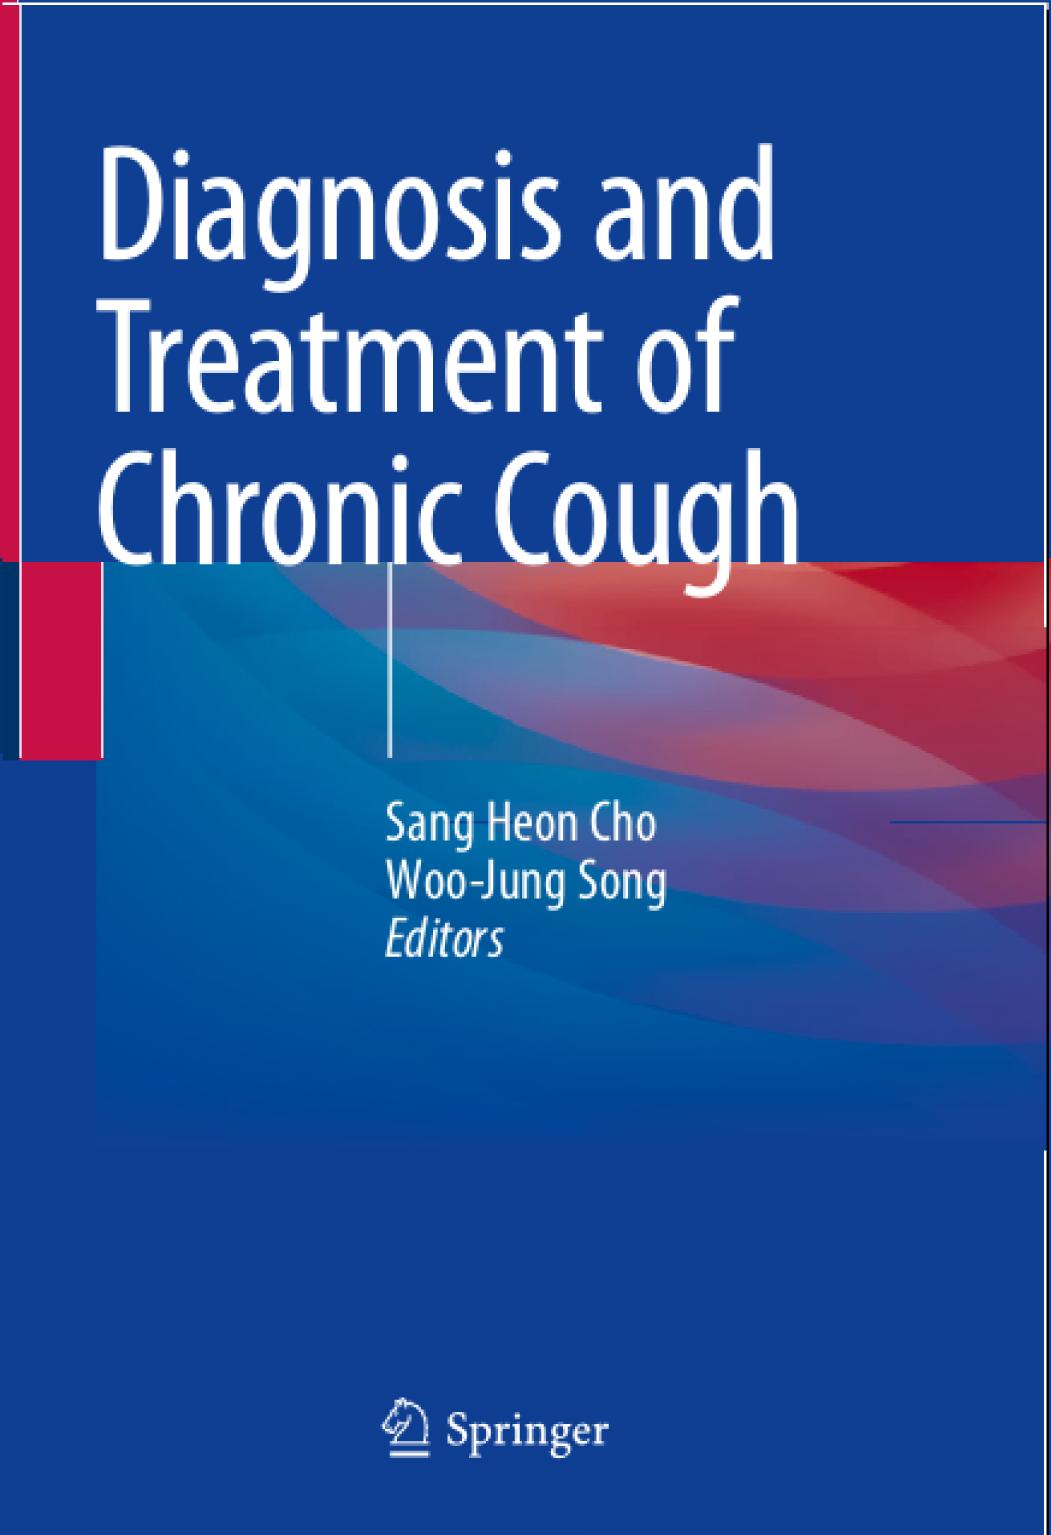 Diagnosis and treatment of chronic cough